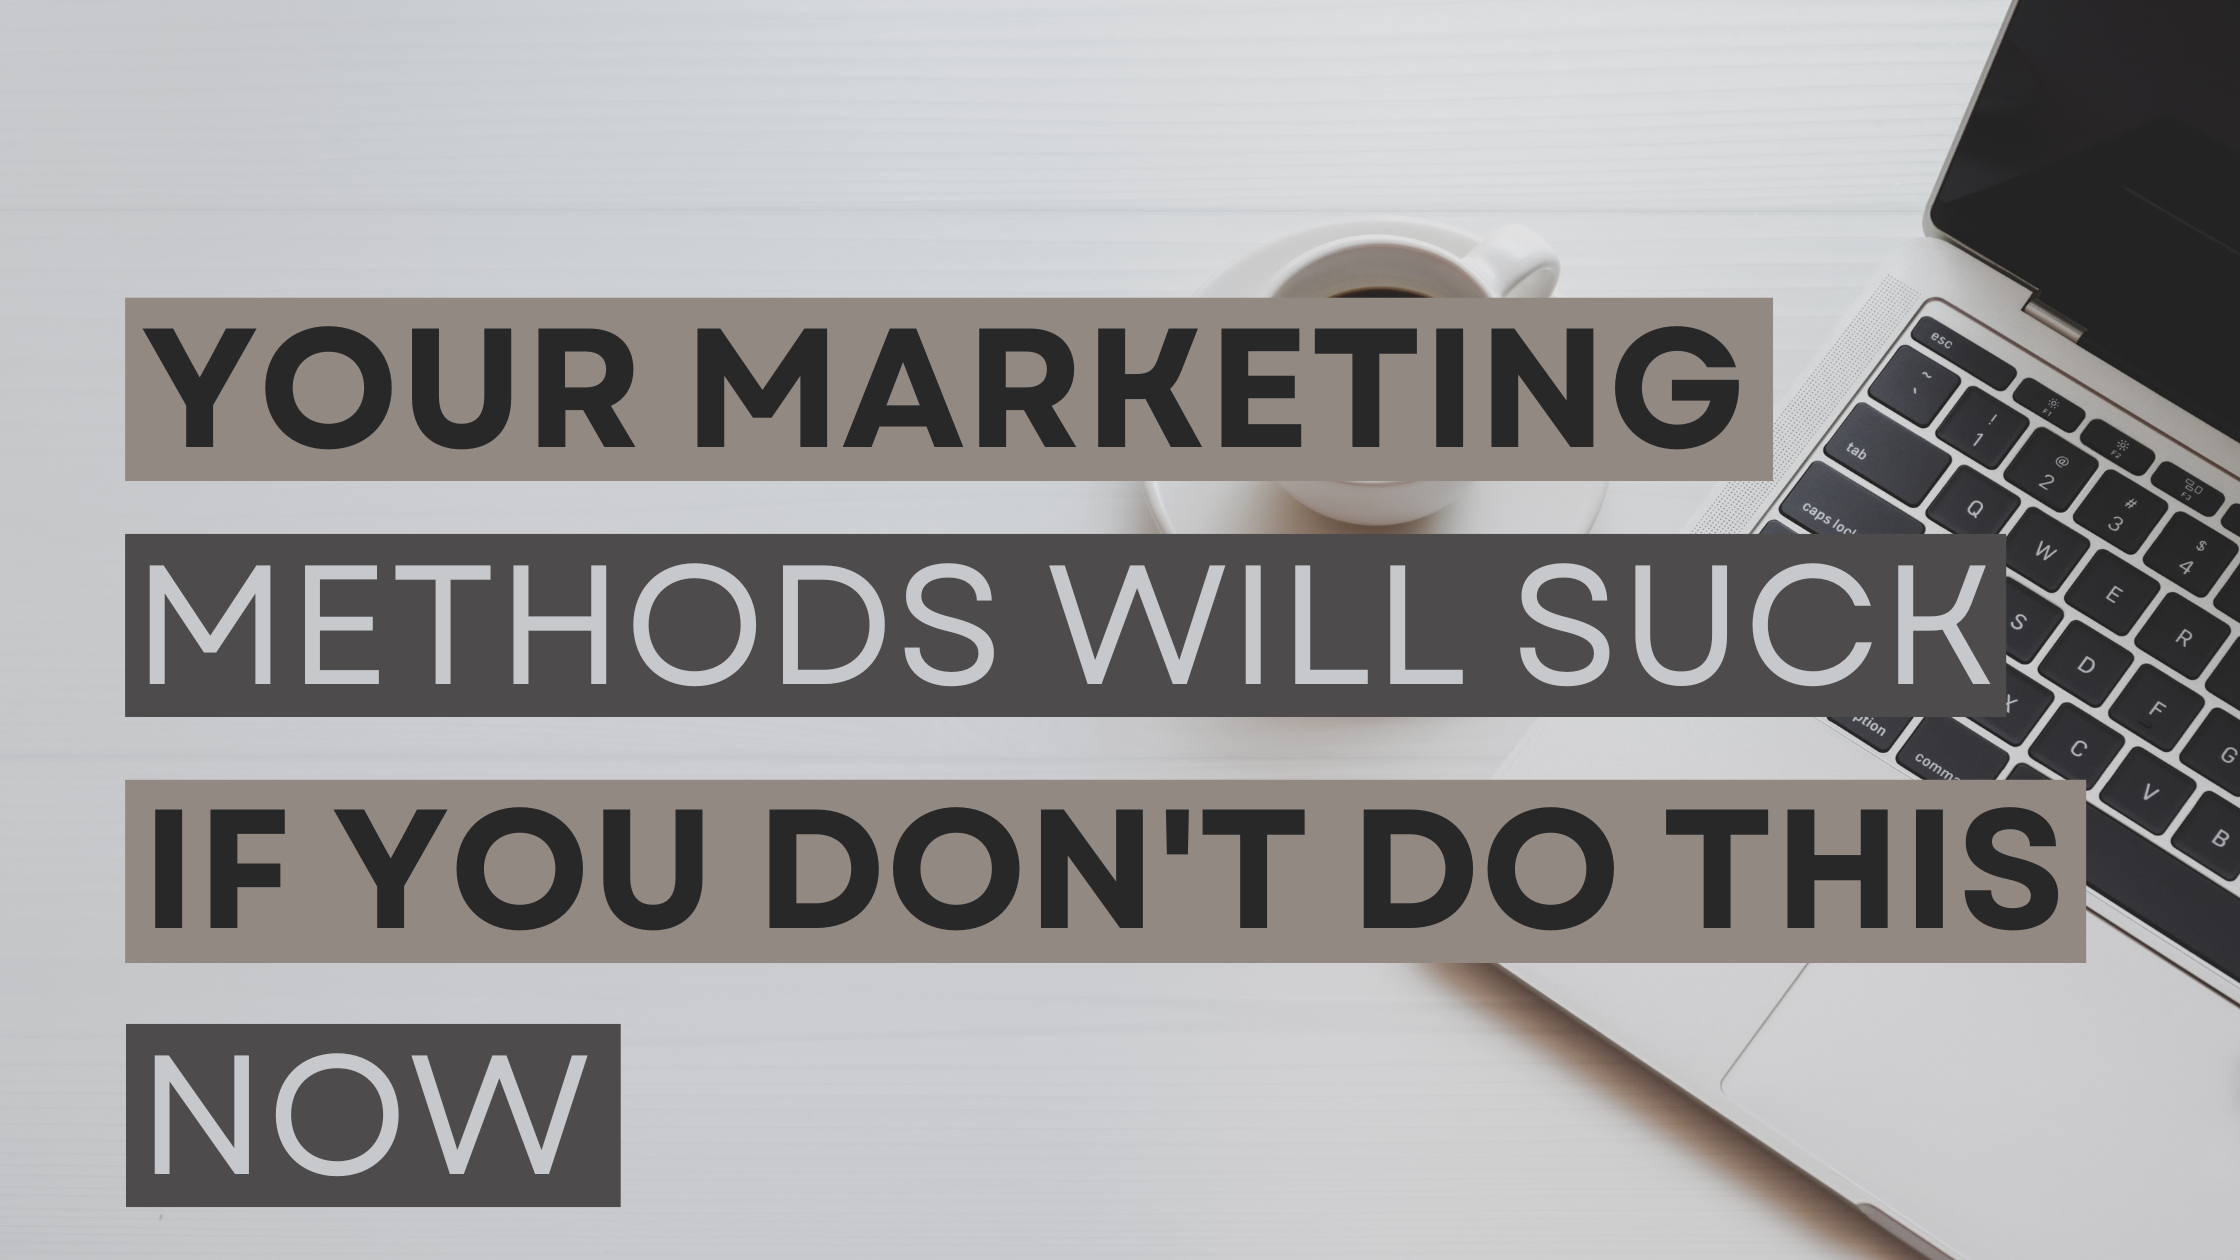 Your marketing methods will suck if you don’t do this now